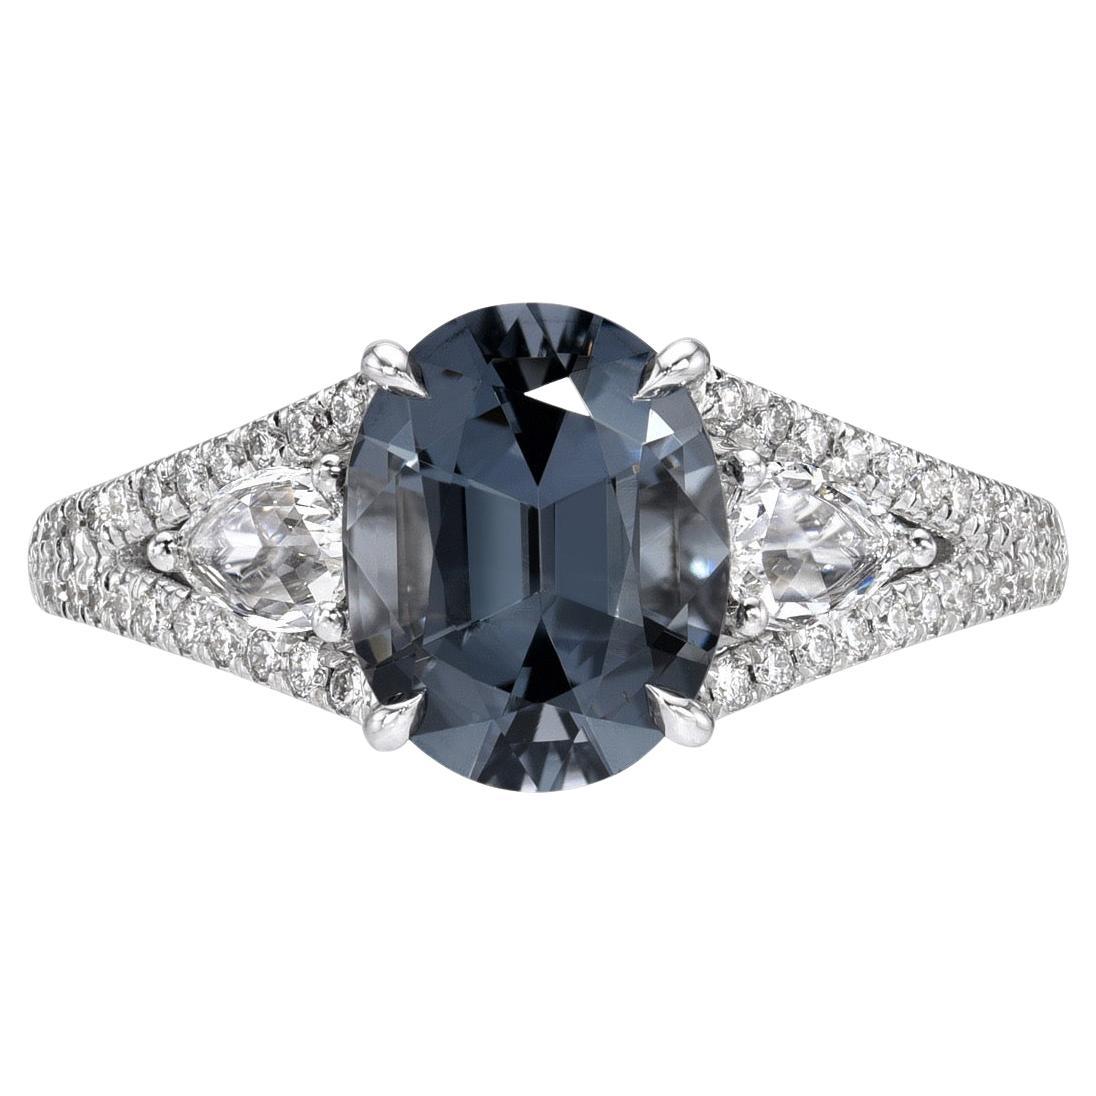 Grey Spinel Ring Oval 2.49 Carats For Sale